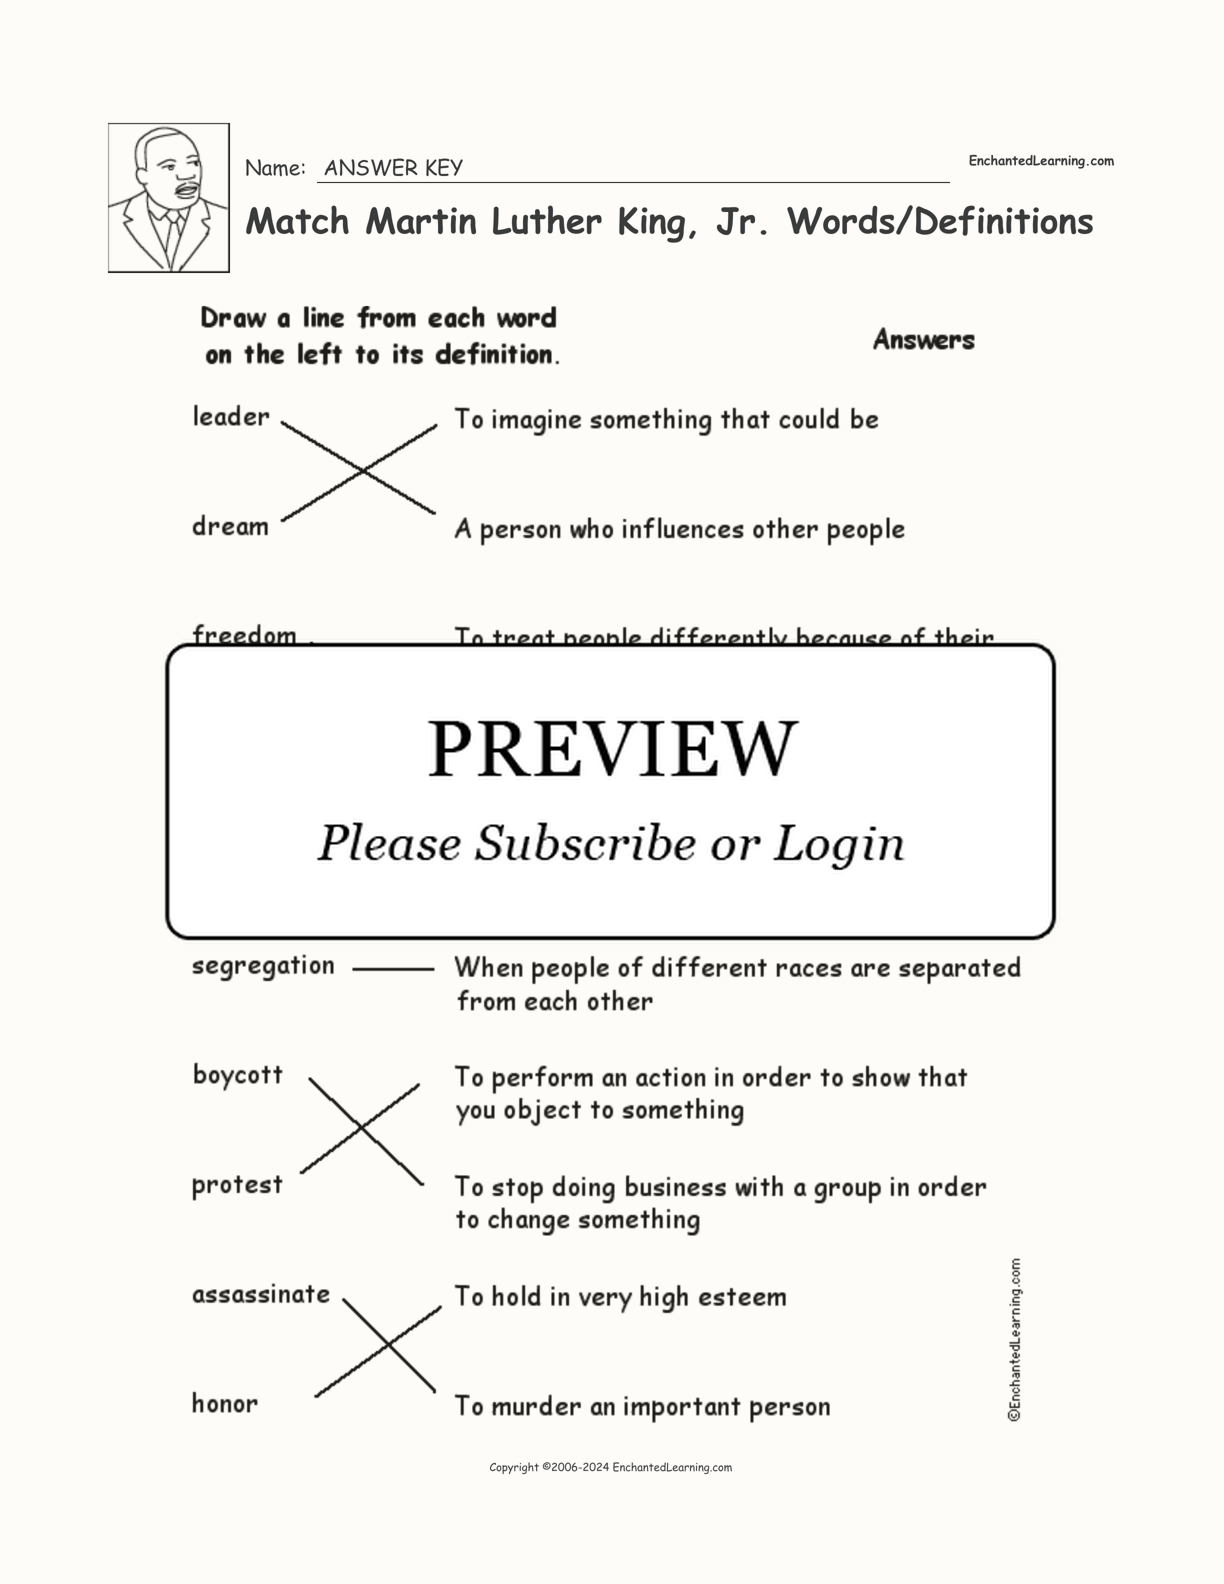 Match Martin Luther King, Jr. Words/Definitions interactive worksheet page 2